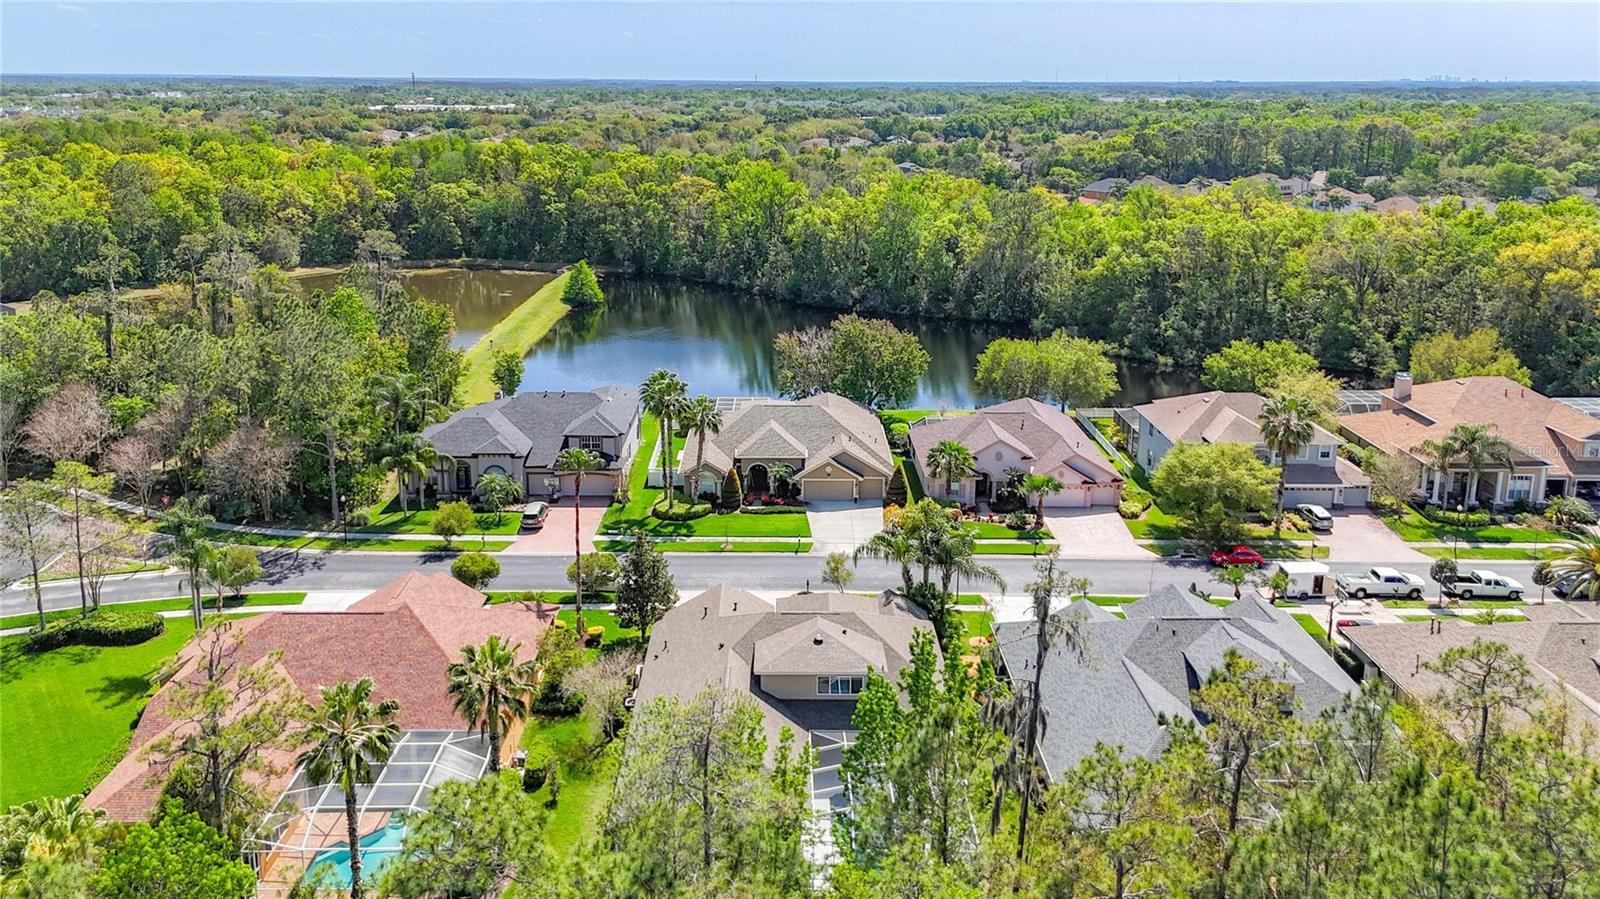 This is where you will be living how many communities have lots of shade trees and trails special for the residents to explore nature? Your home is the second one in photo bottom right. Seven Oaks is one of a kind and homes are NOt on top of each other